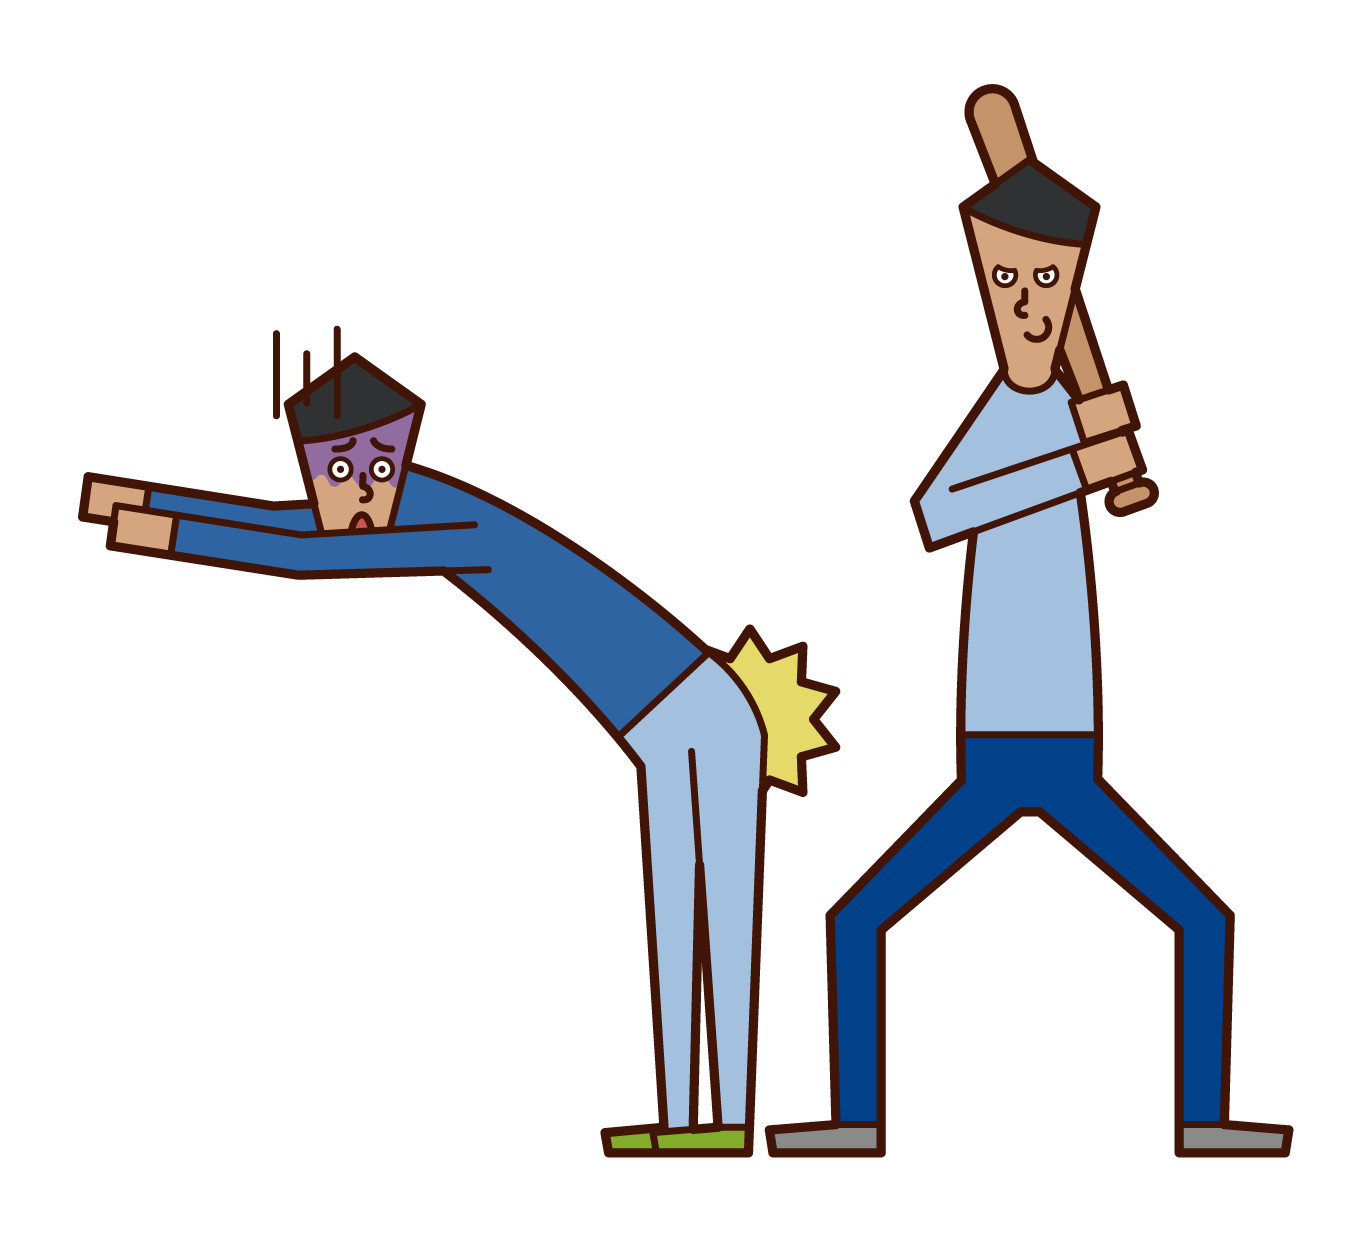 Illustration of a man who gives corporal punishment to a friend